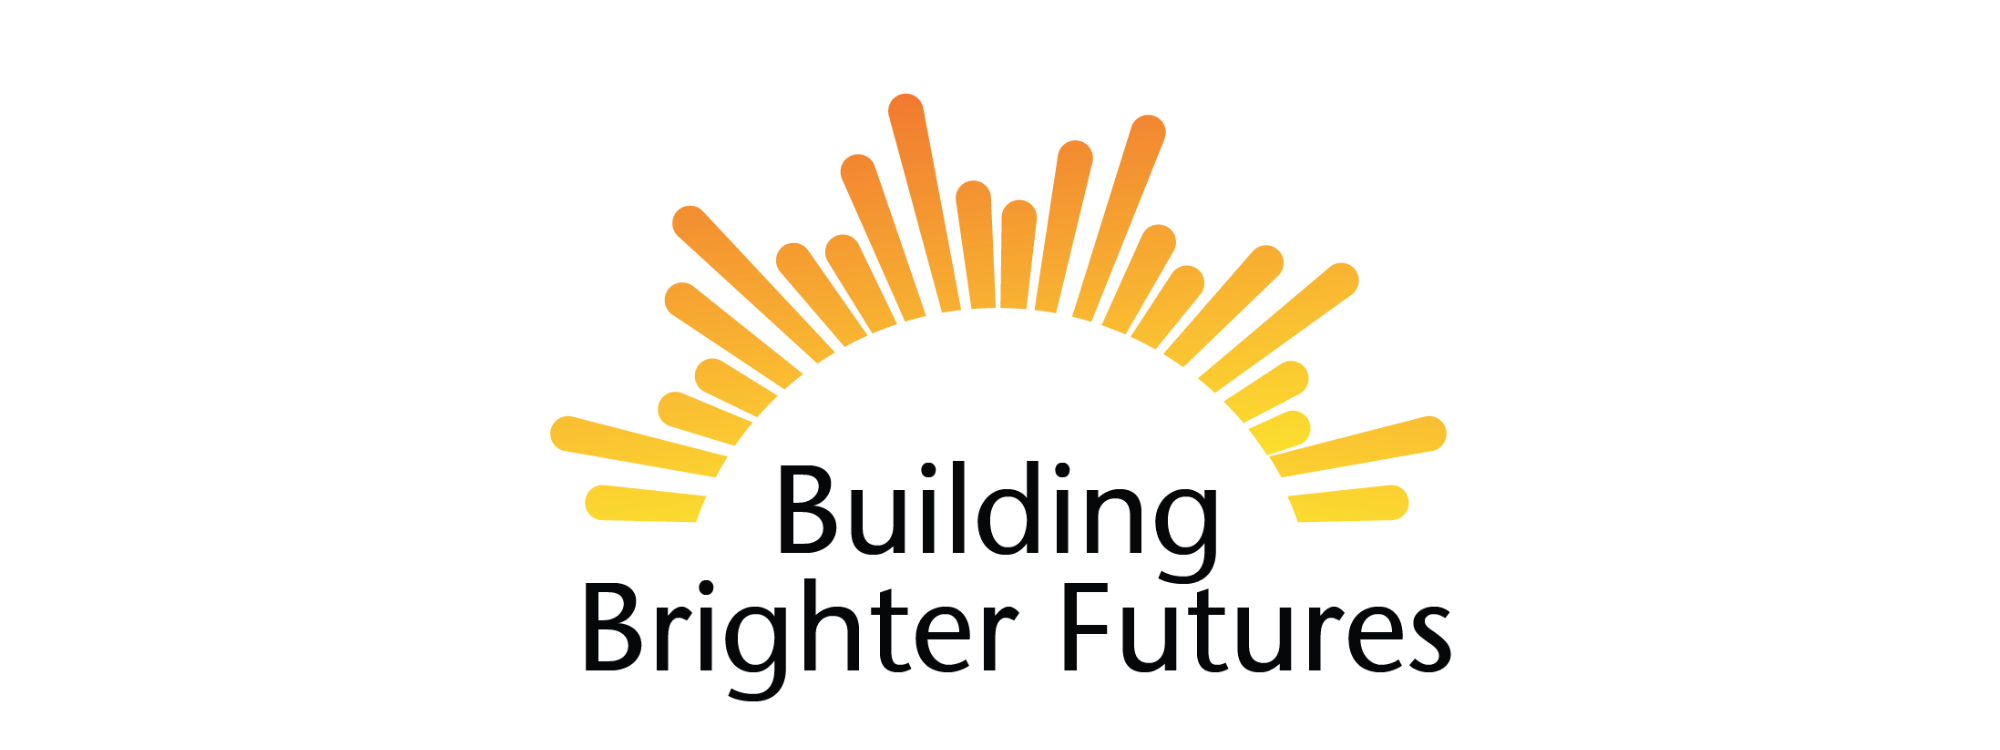 RELEASE: The Arc of Massachusetts to Hold Building Brighter Futures Gala and Auction on Thursday, April 7